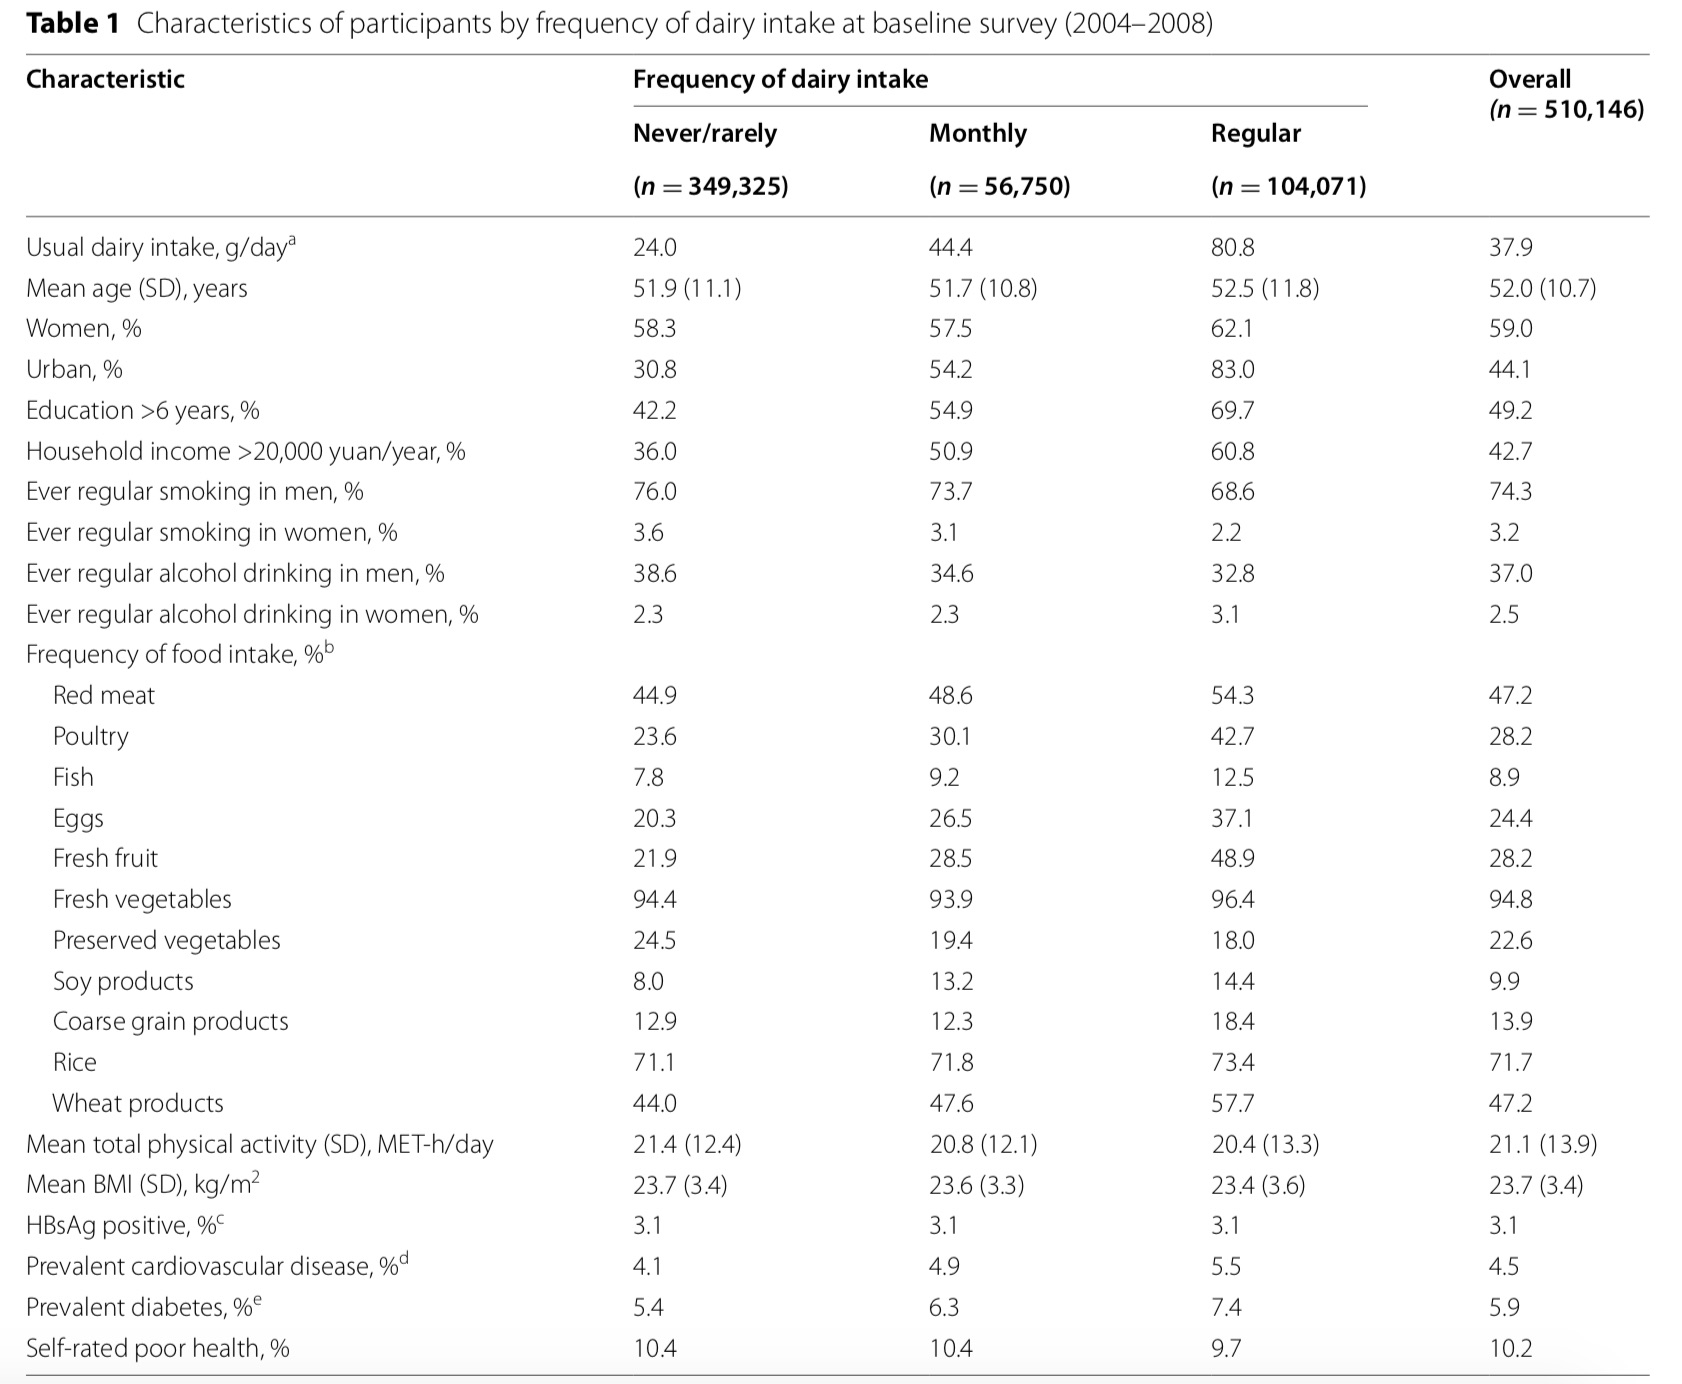 Characteristics of participants by dairy intake in the 2004-2008 baseline survey.